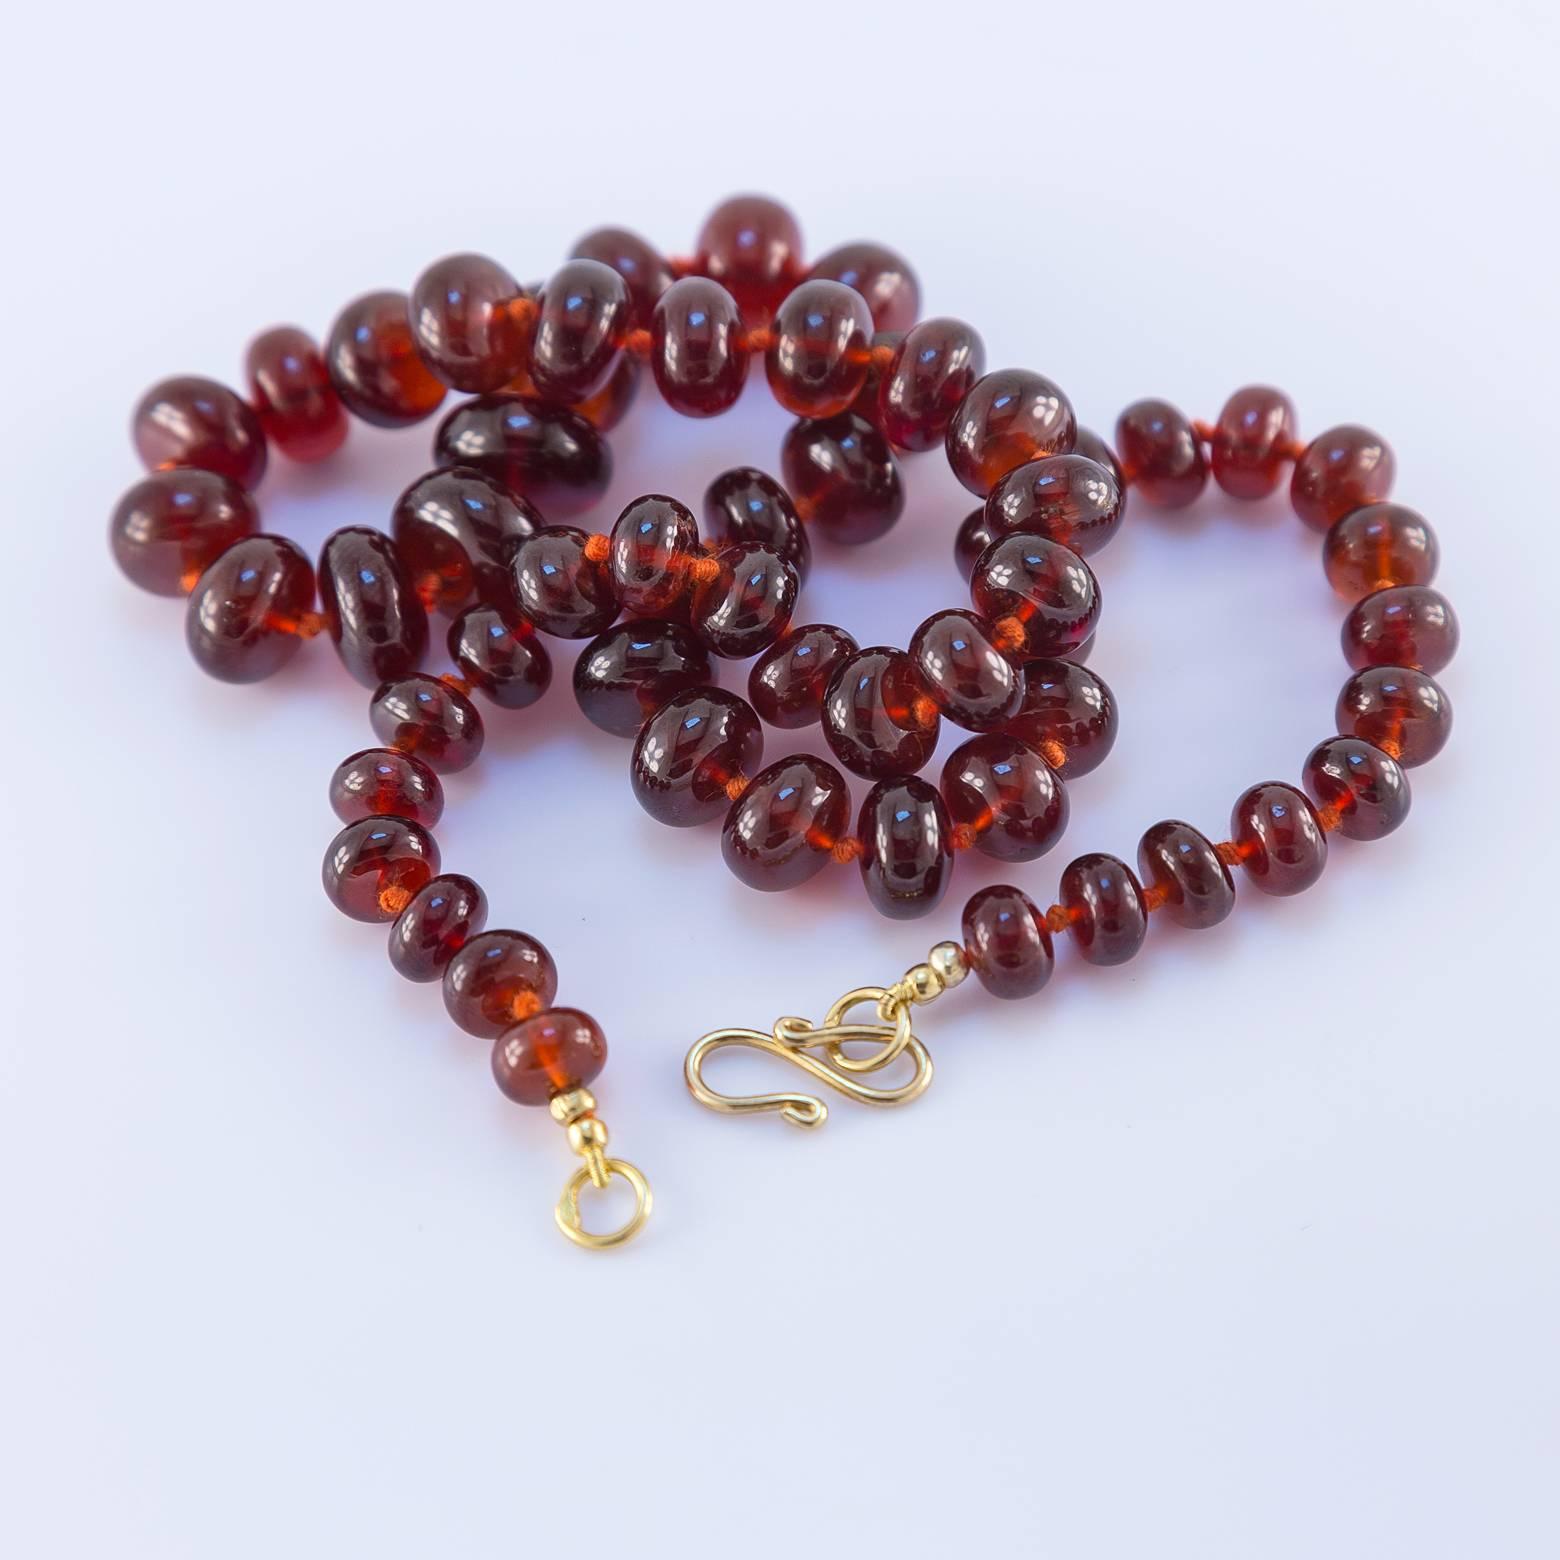 This is a rare and beautiful large garnet necklace that is classic and timeless. The graduated beads of rich garnet have a smooth round quality that akin to a fine cabernet. The deep crimson garnet has a great weight to it as it rolls against the